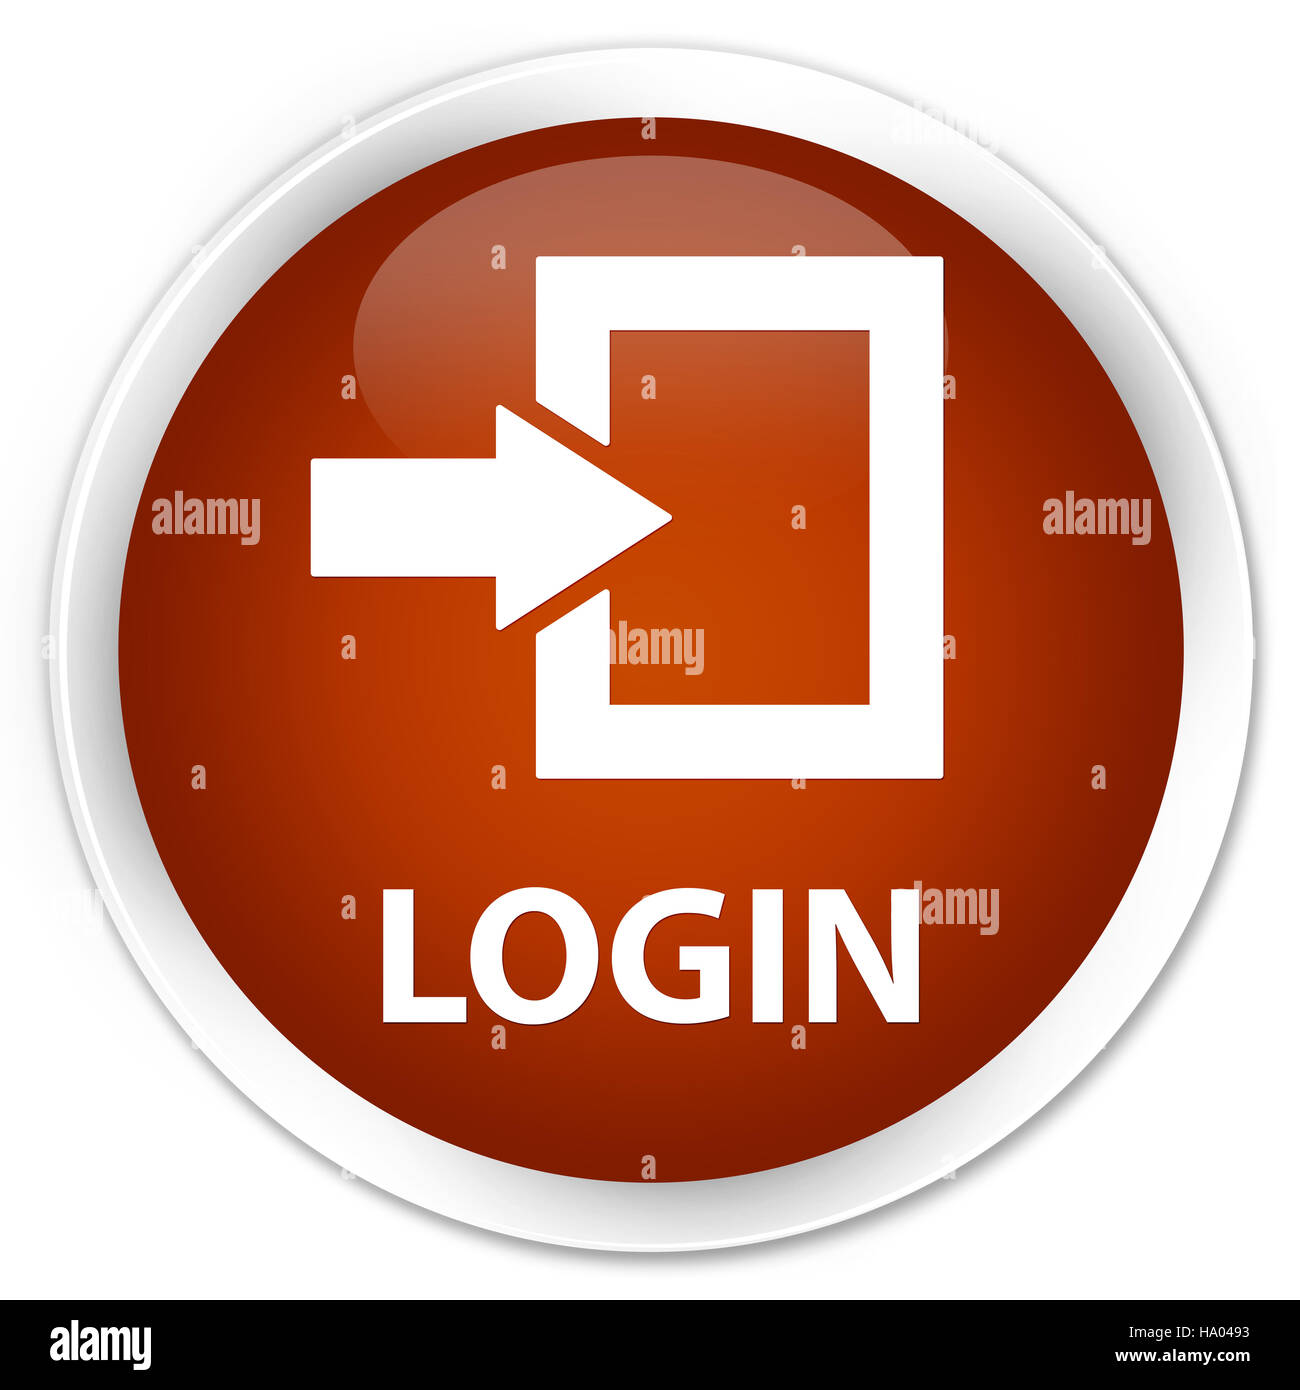 Login isolated on premium brown round button abstract illustration Stock Photo